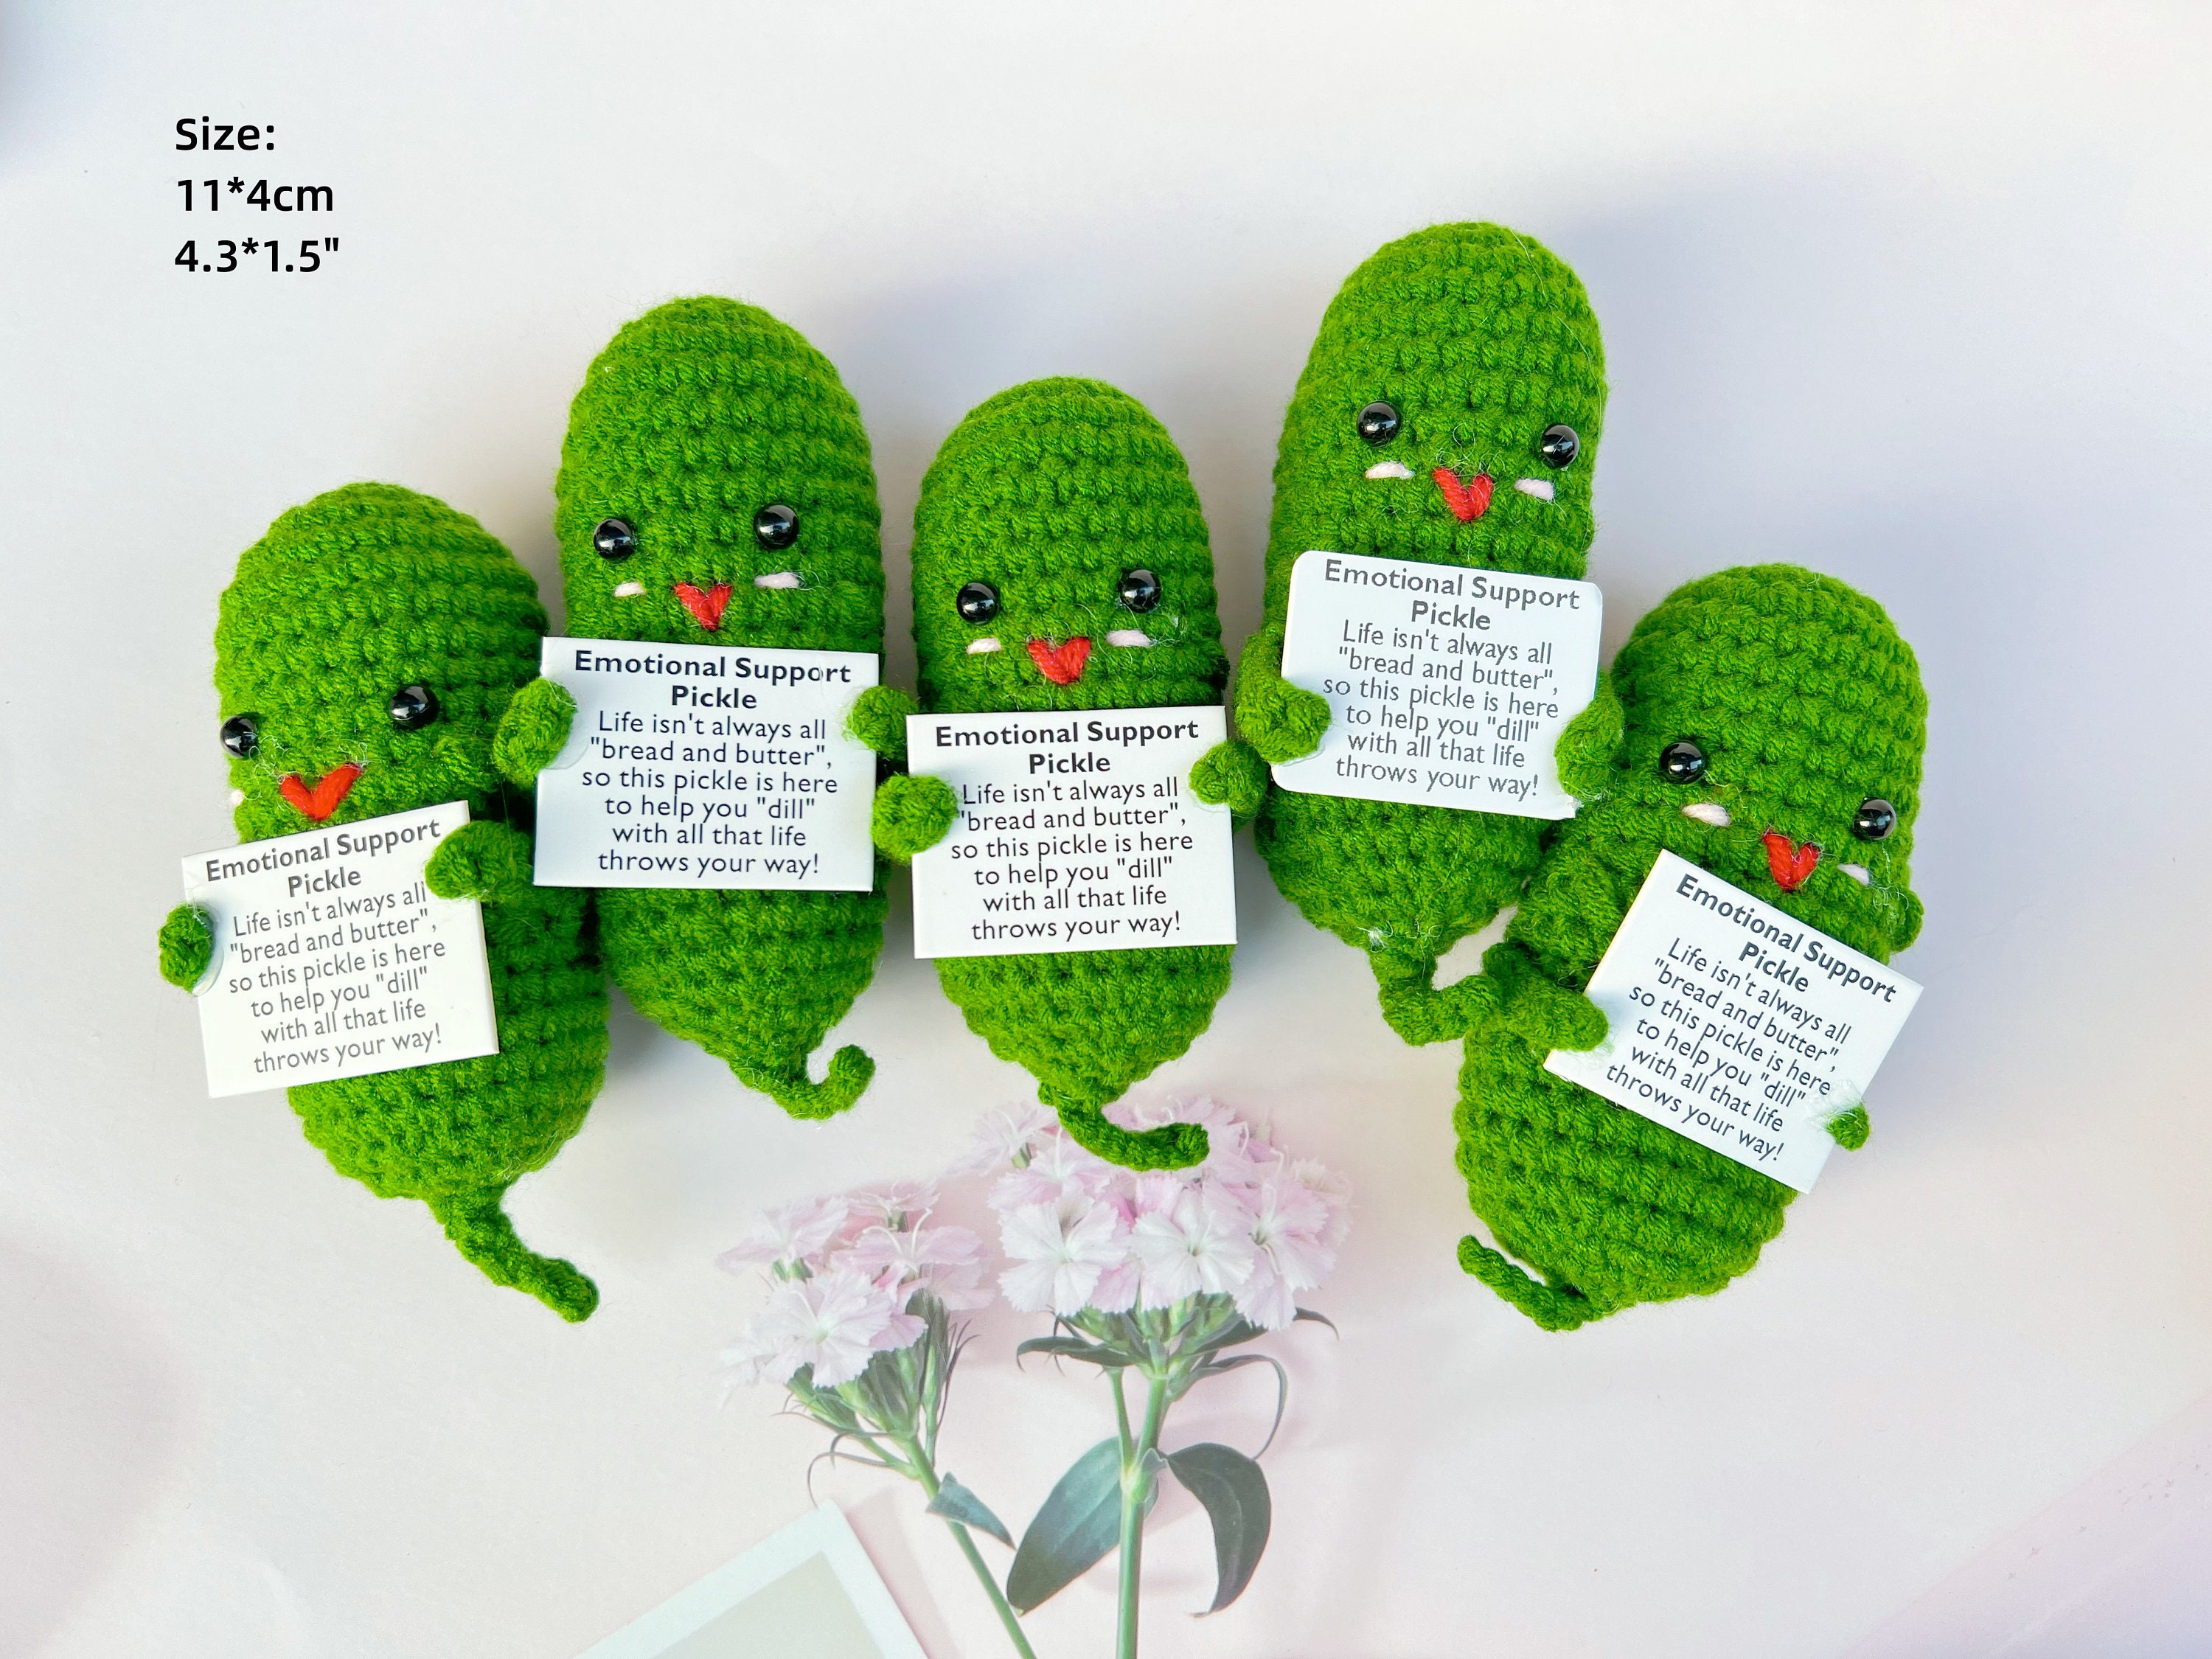 Emotional Support Pickle – fairtradefamily